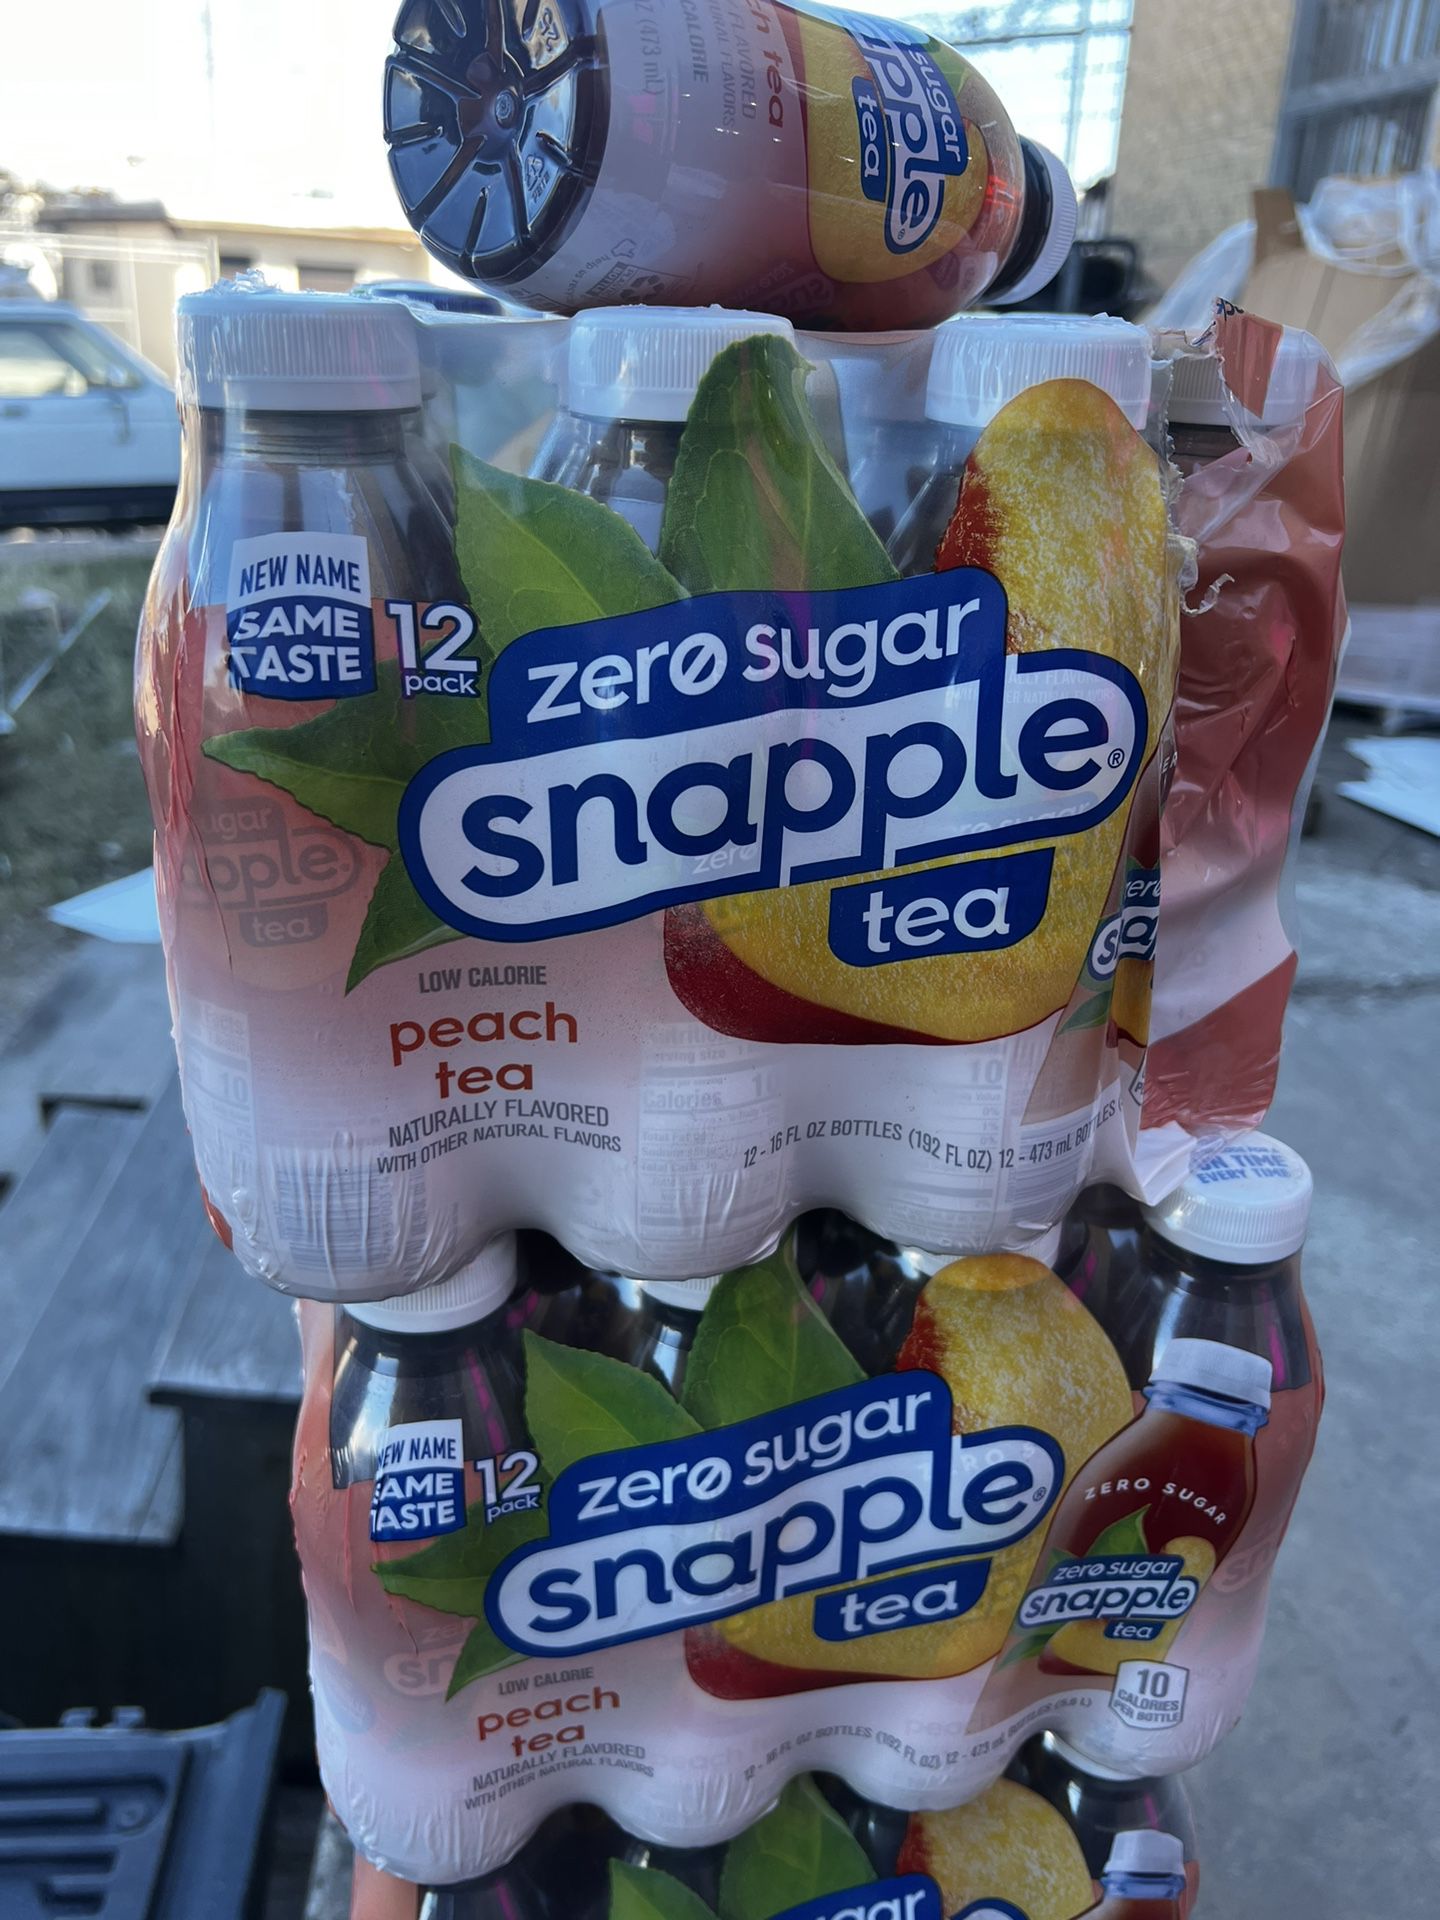 Snapple,box Of Chips 